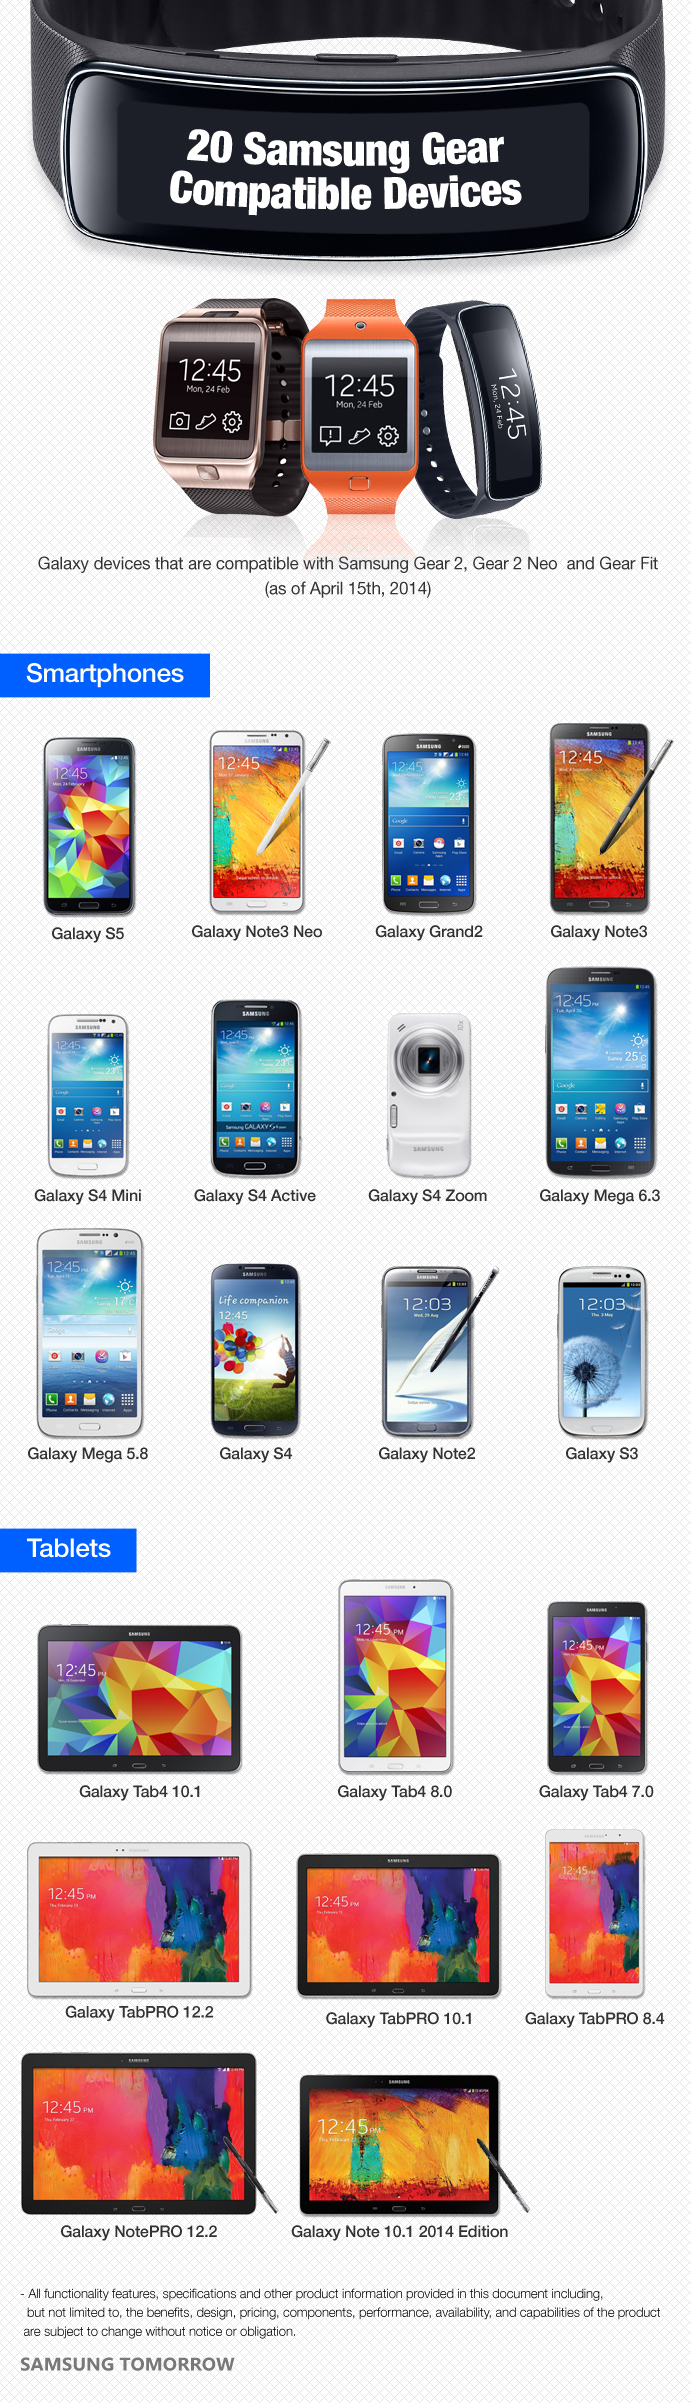 Samsung-Gear-Devices-Compatible-with-20-Galaxy-Devices1